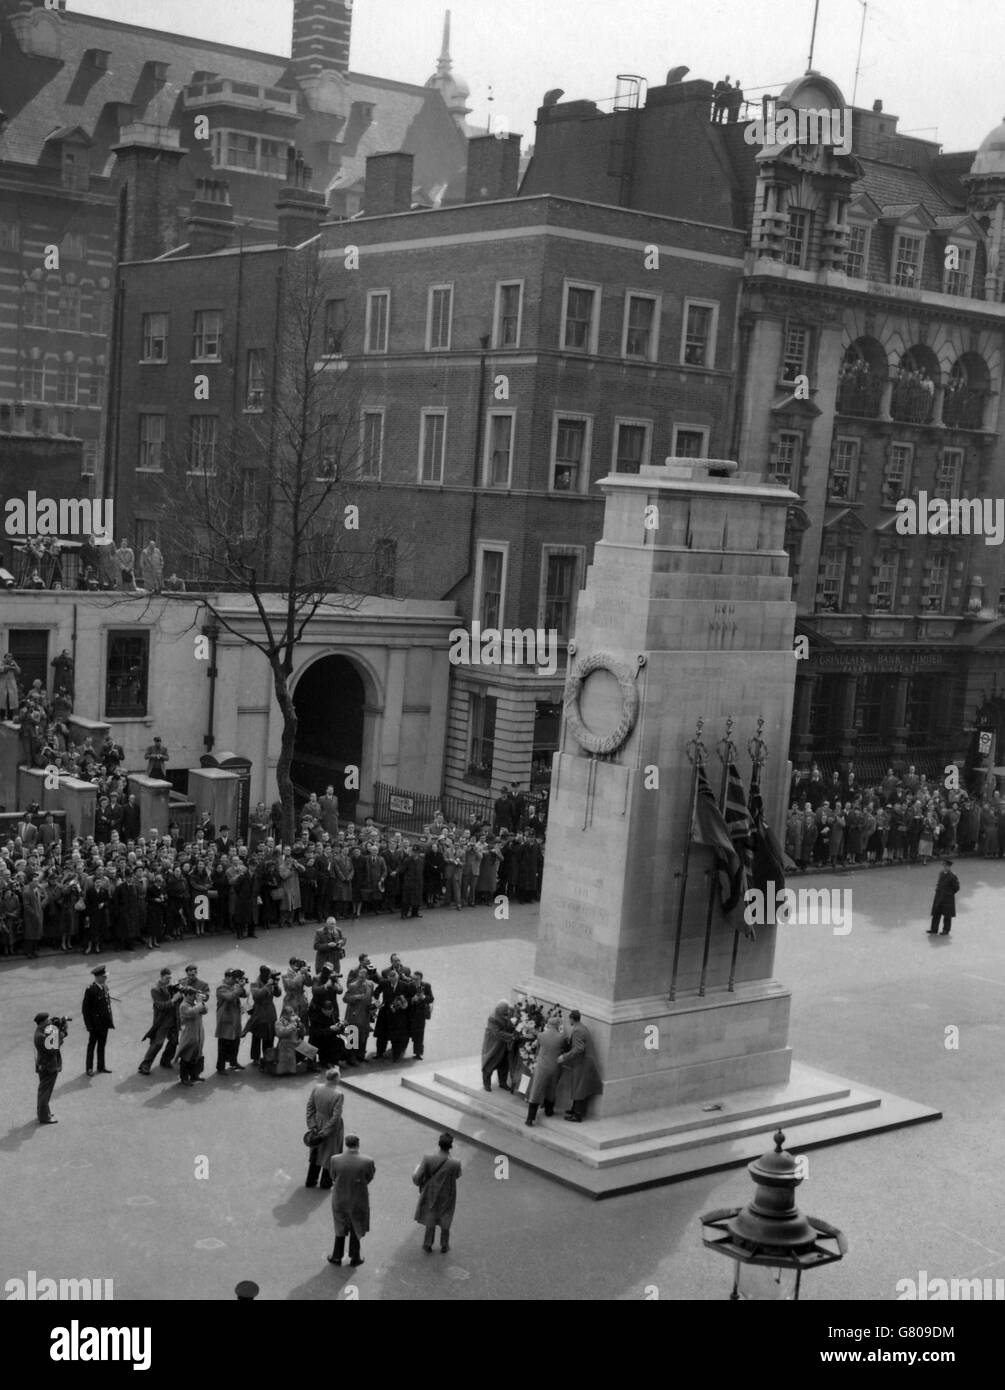 The Cenotaph in Whitehall, where Russian leaders Marshal Bulganin and Mr Krushchev laid a wreath. Stock Photo